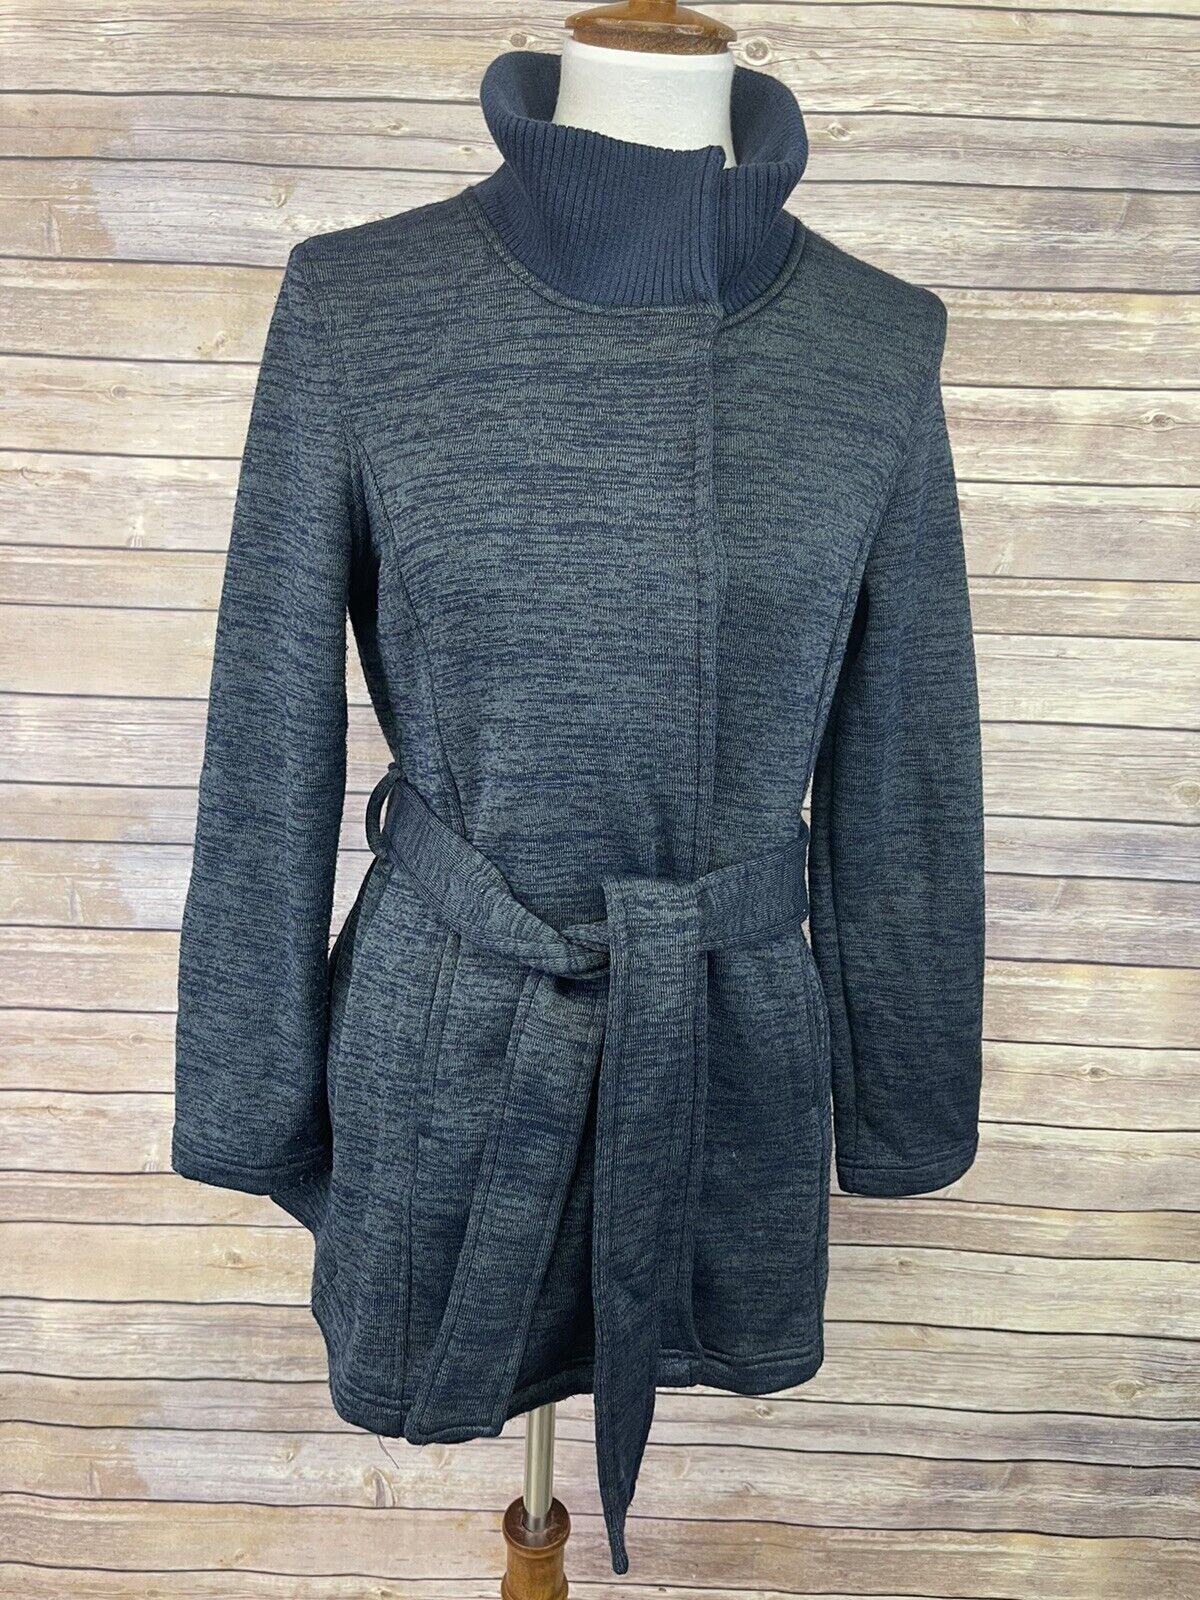 Market Spruce Small Coat Belted Fleece Lined Blue Sweater Knit Button Up Cozy